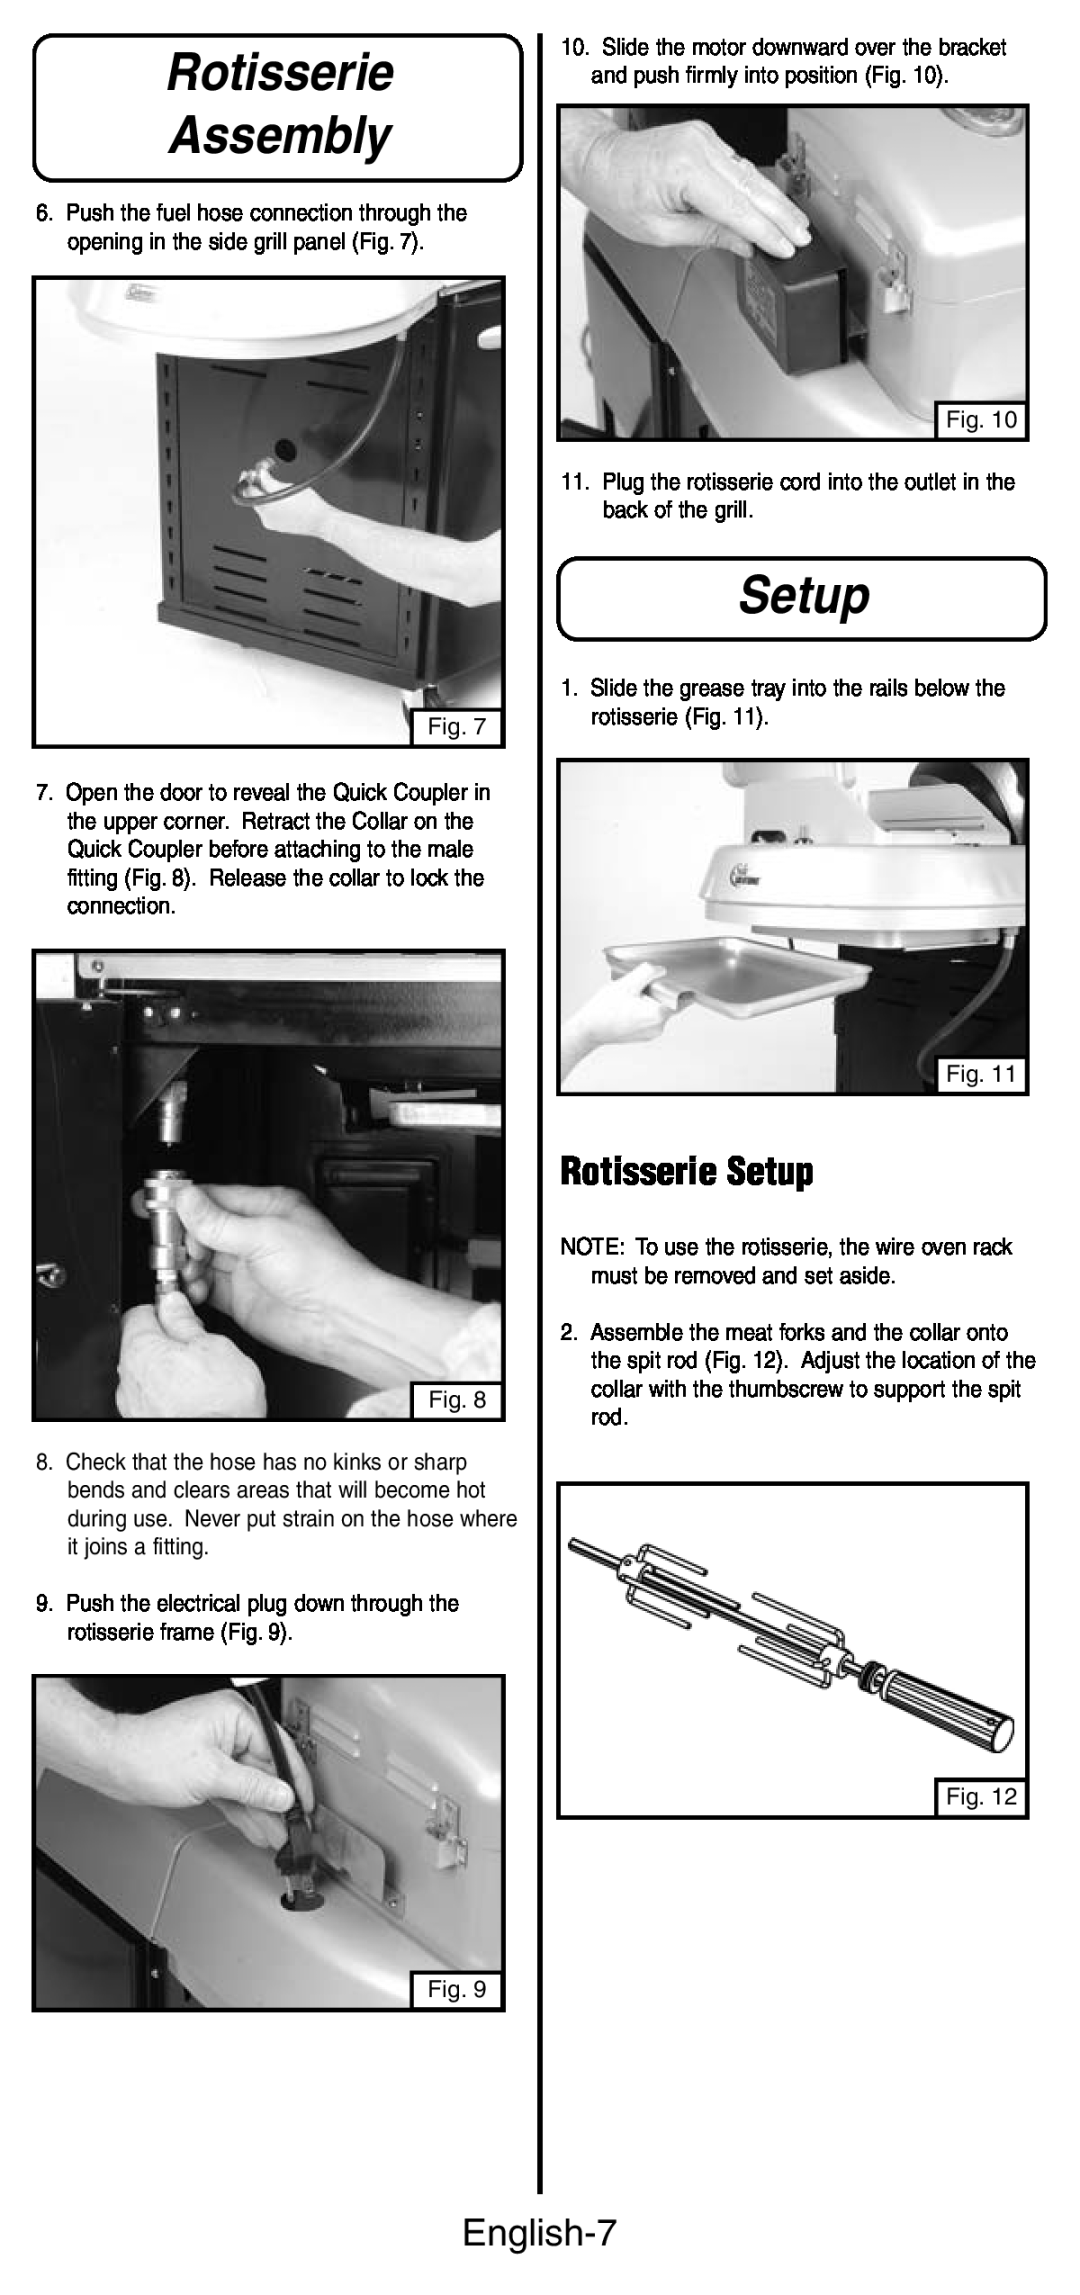 Coleman 9987 Series instruction manual Rotisserie Assembly, Rotisserie Setup, English-7 